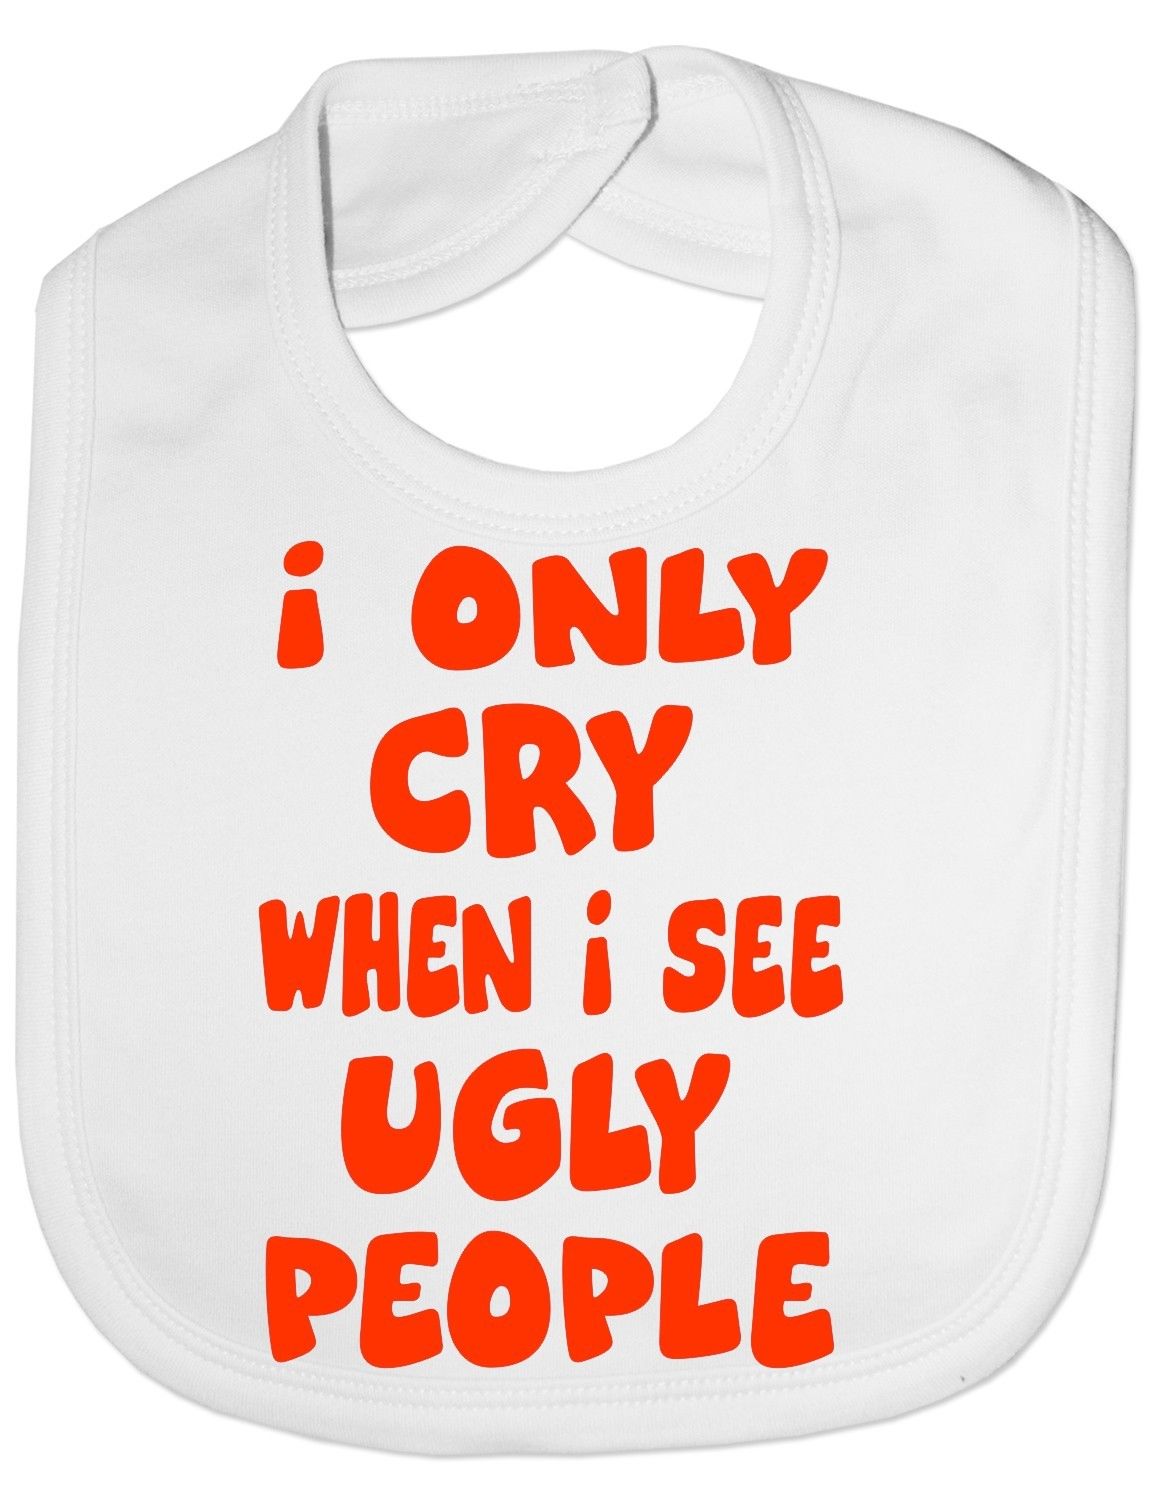 Only Cry When See Ugly People Baby Bib